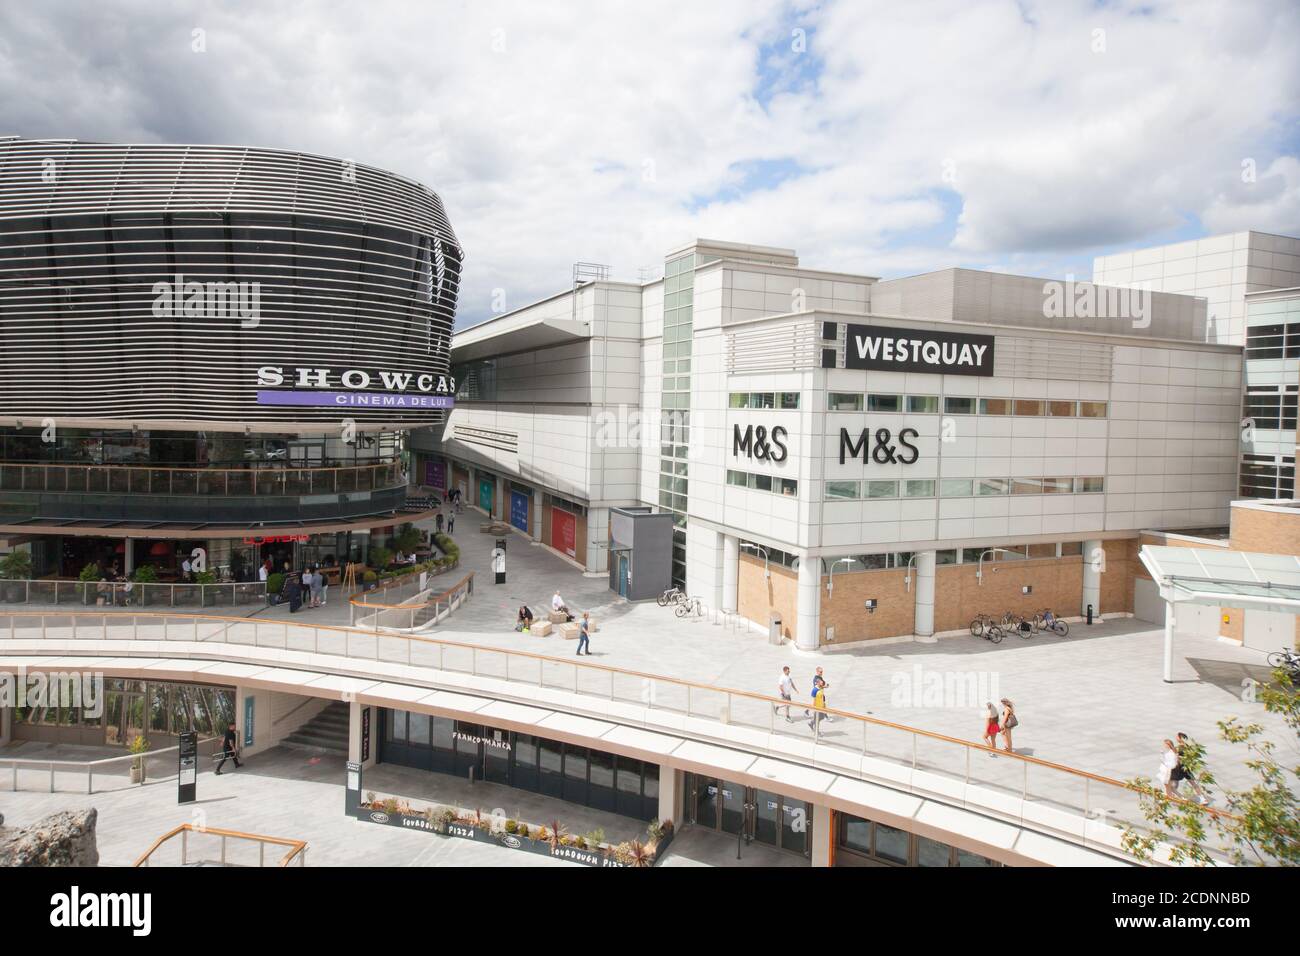 Shops and a Cinema at Westquay Shopping Centre, Southampton, Hampshire in the UK, taken 10th July 2020 Stock Photo